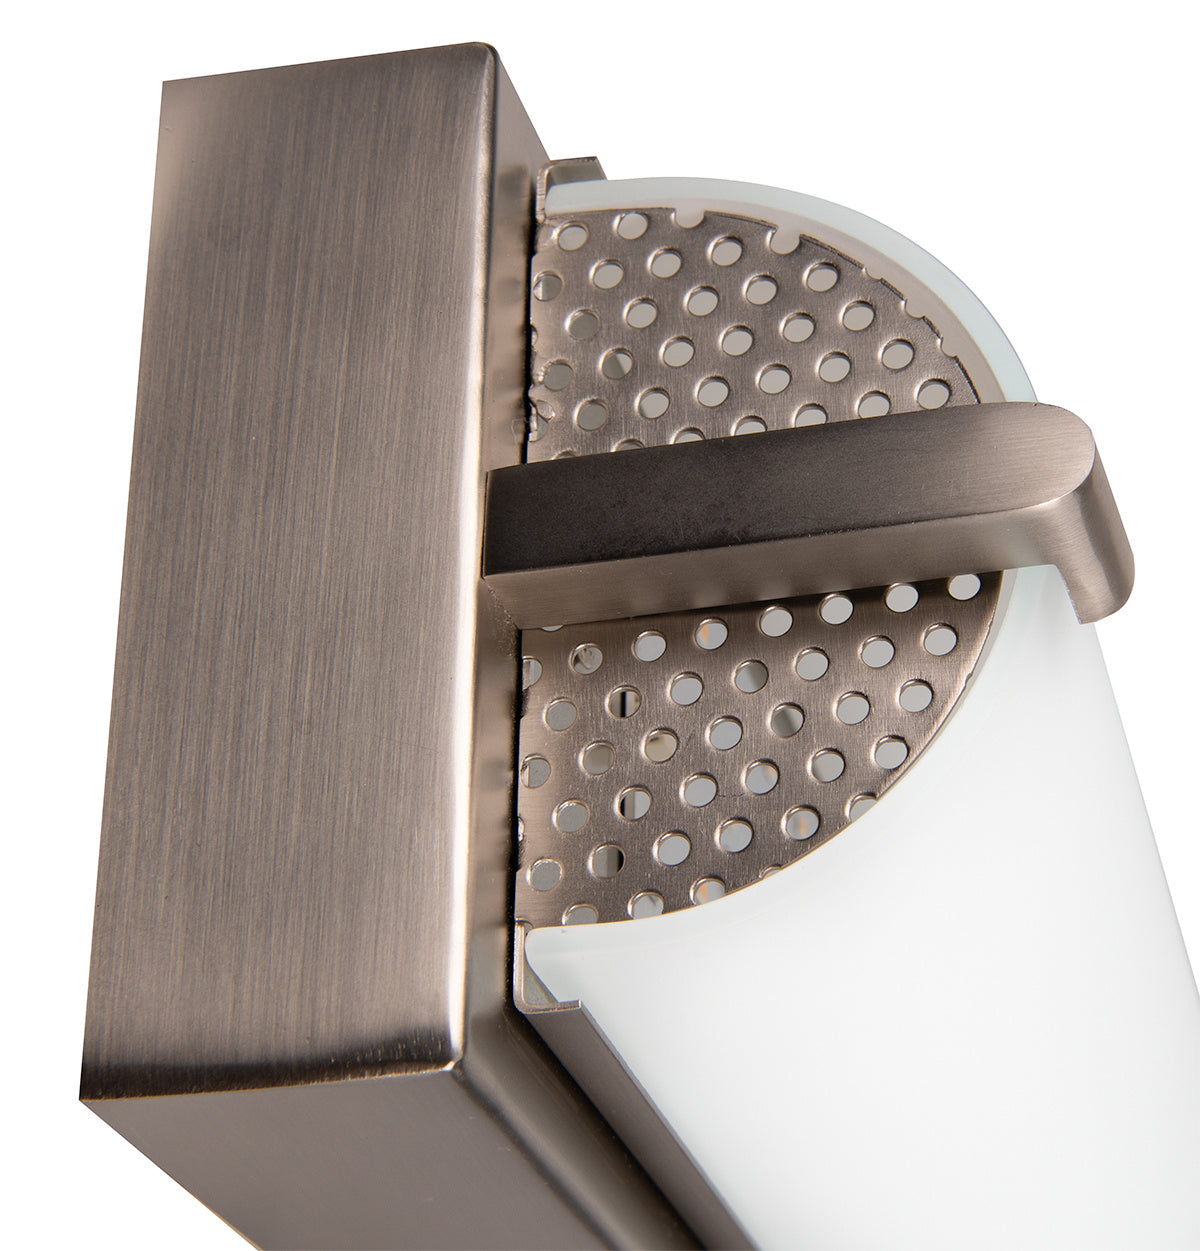 Norwell Alto 9692-BN-MO Wall Light - Brushed Nickel